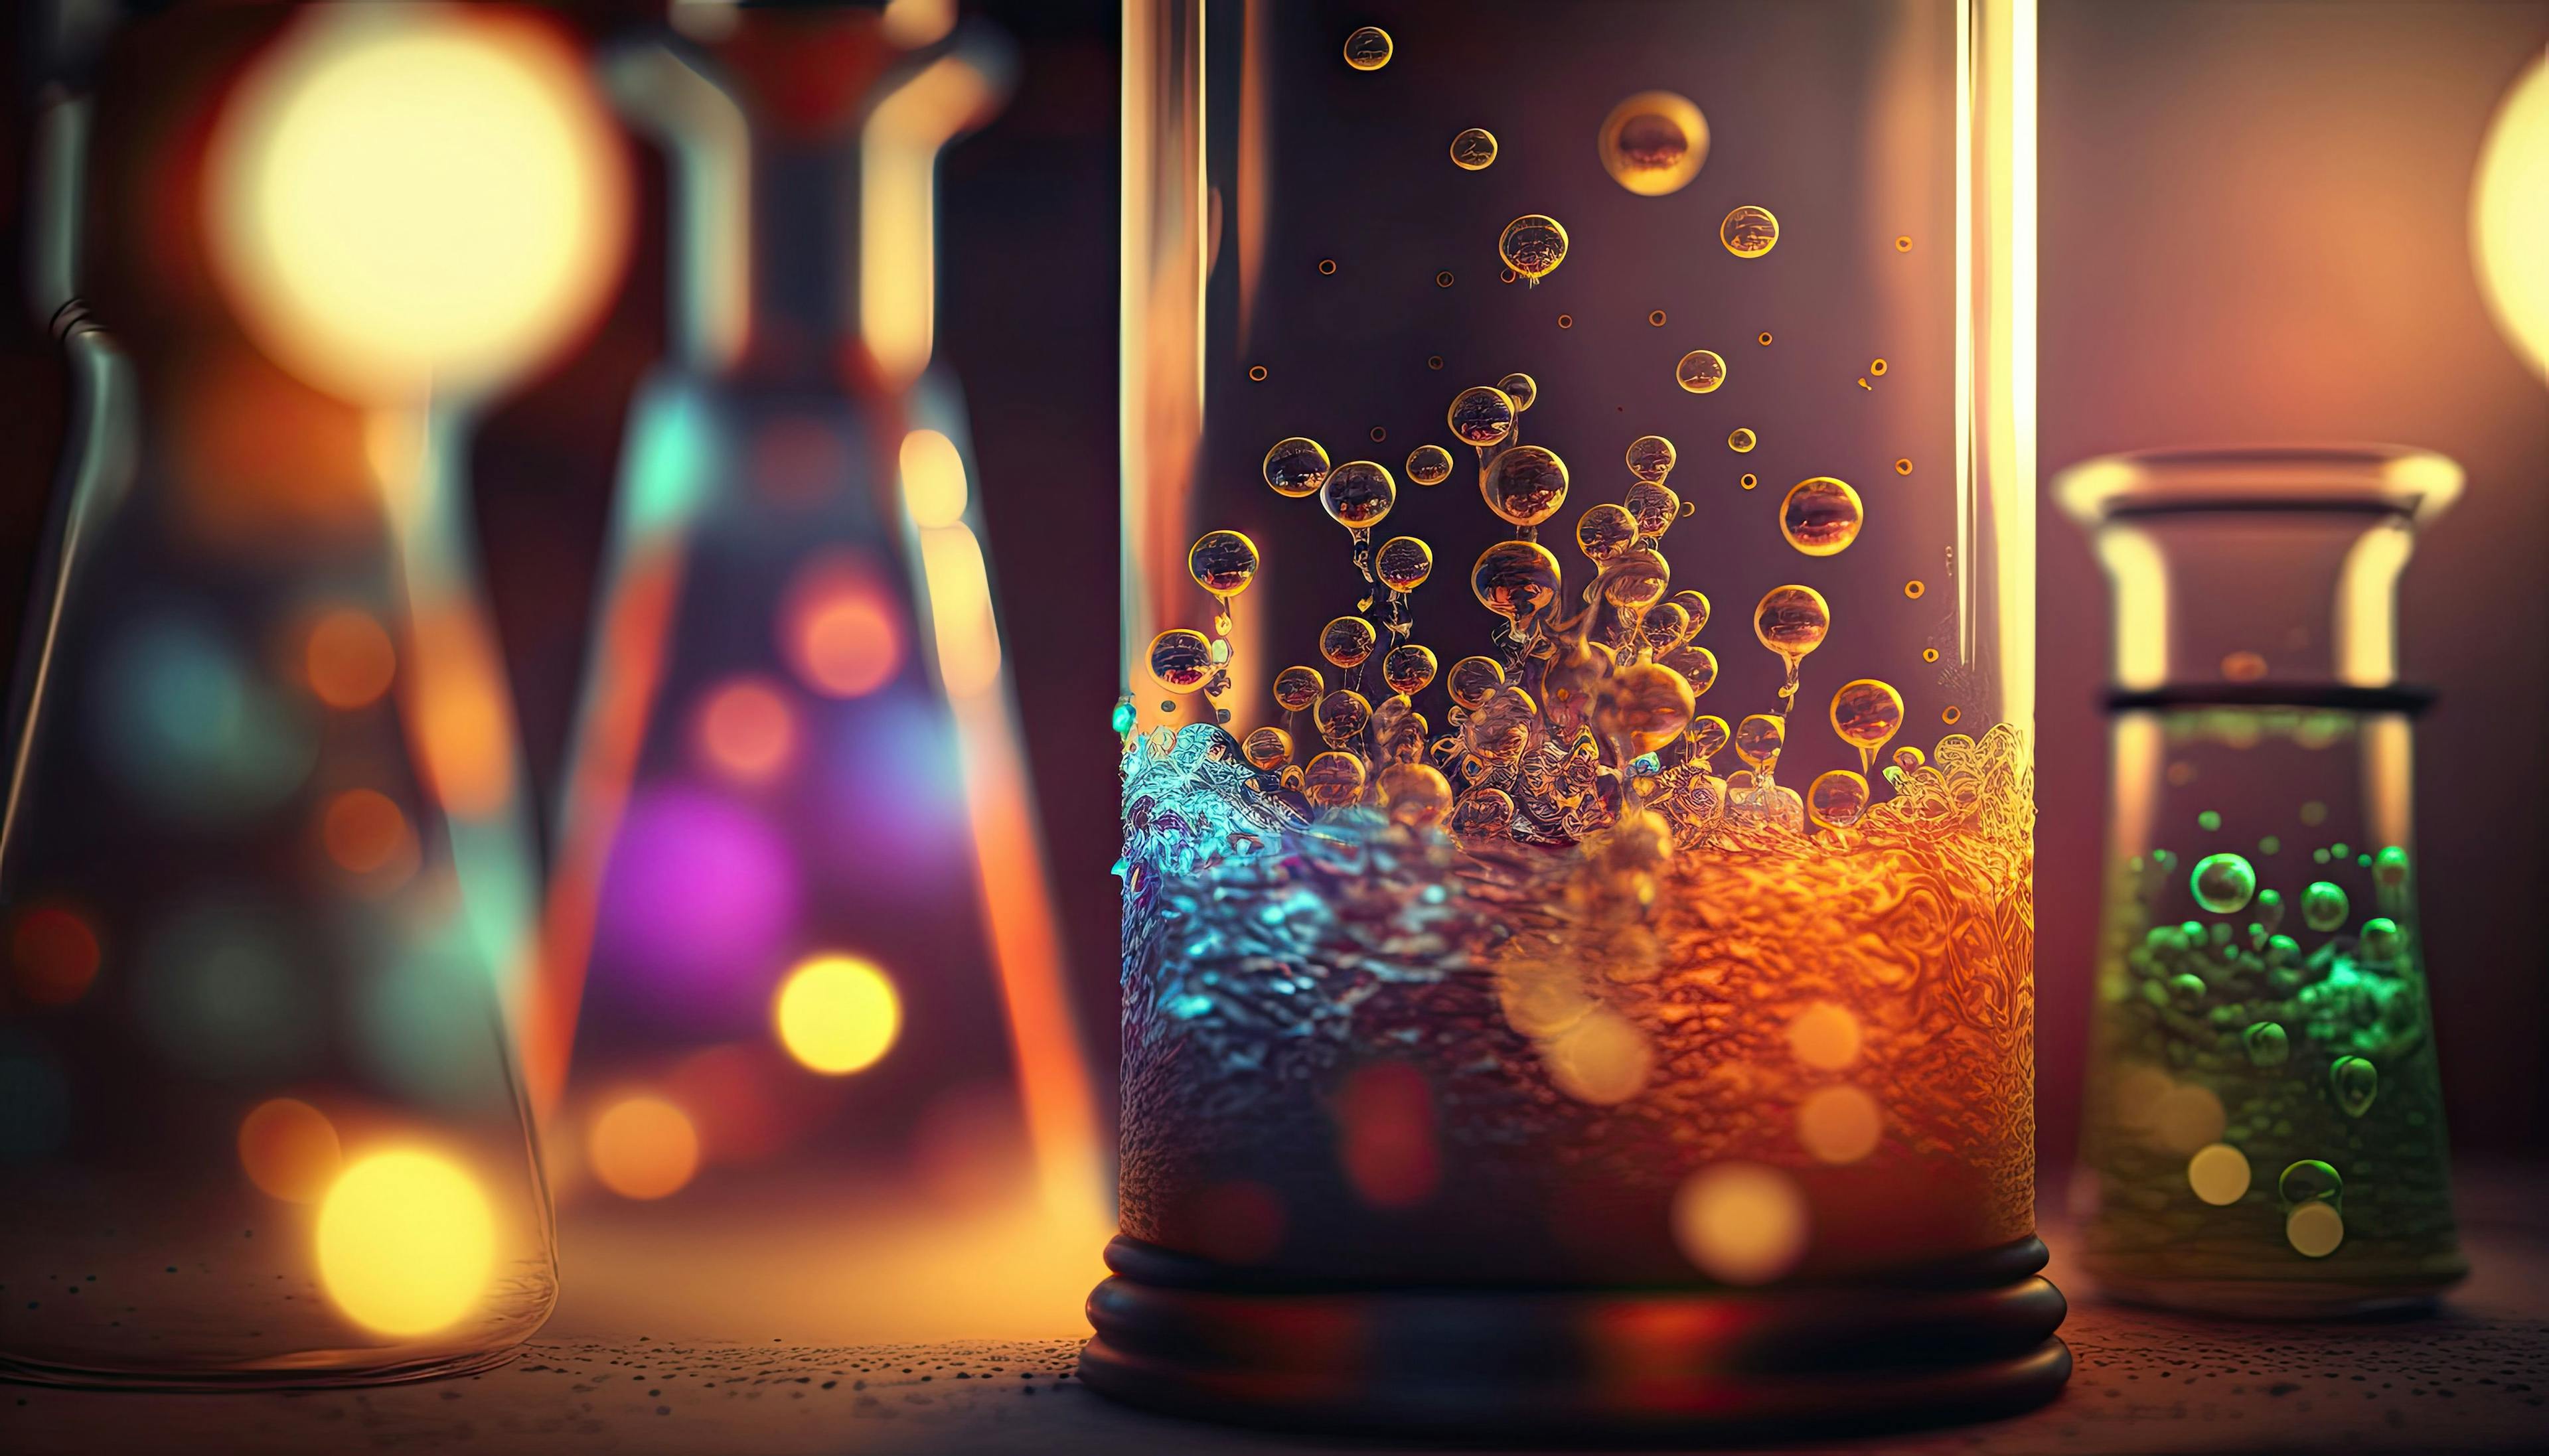 Abstract scientific beakers and bunson burners. Bubbling concoctions and chemical reactions. Colorful vials of liquid. | Image Credit: © Fox Ave Designs - stock.adobe.com